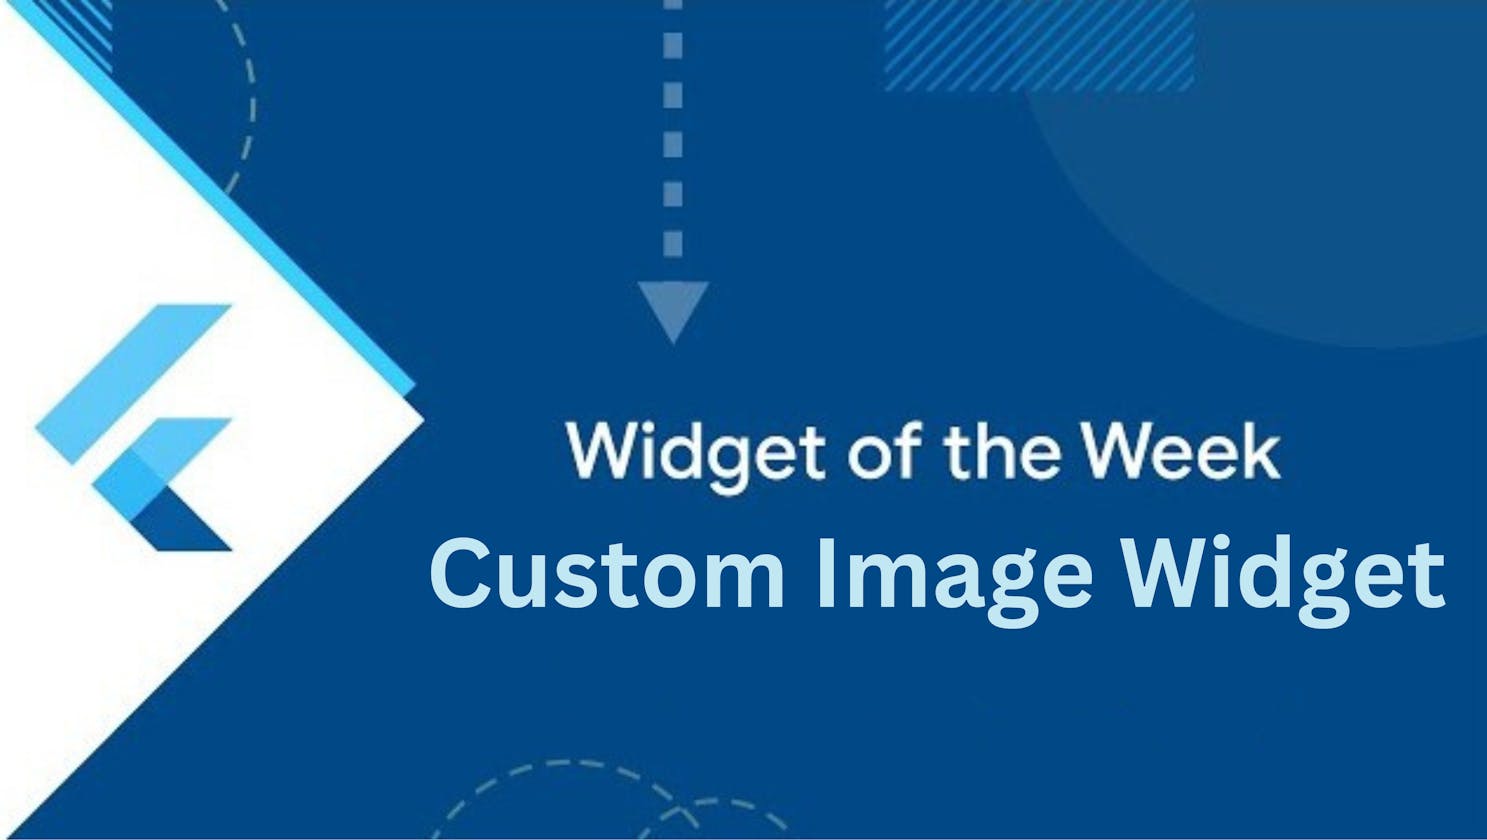 Custom Image Widget: File Image, Network Image, SVG Image, and Asset Image can support this widget with Image Shape